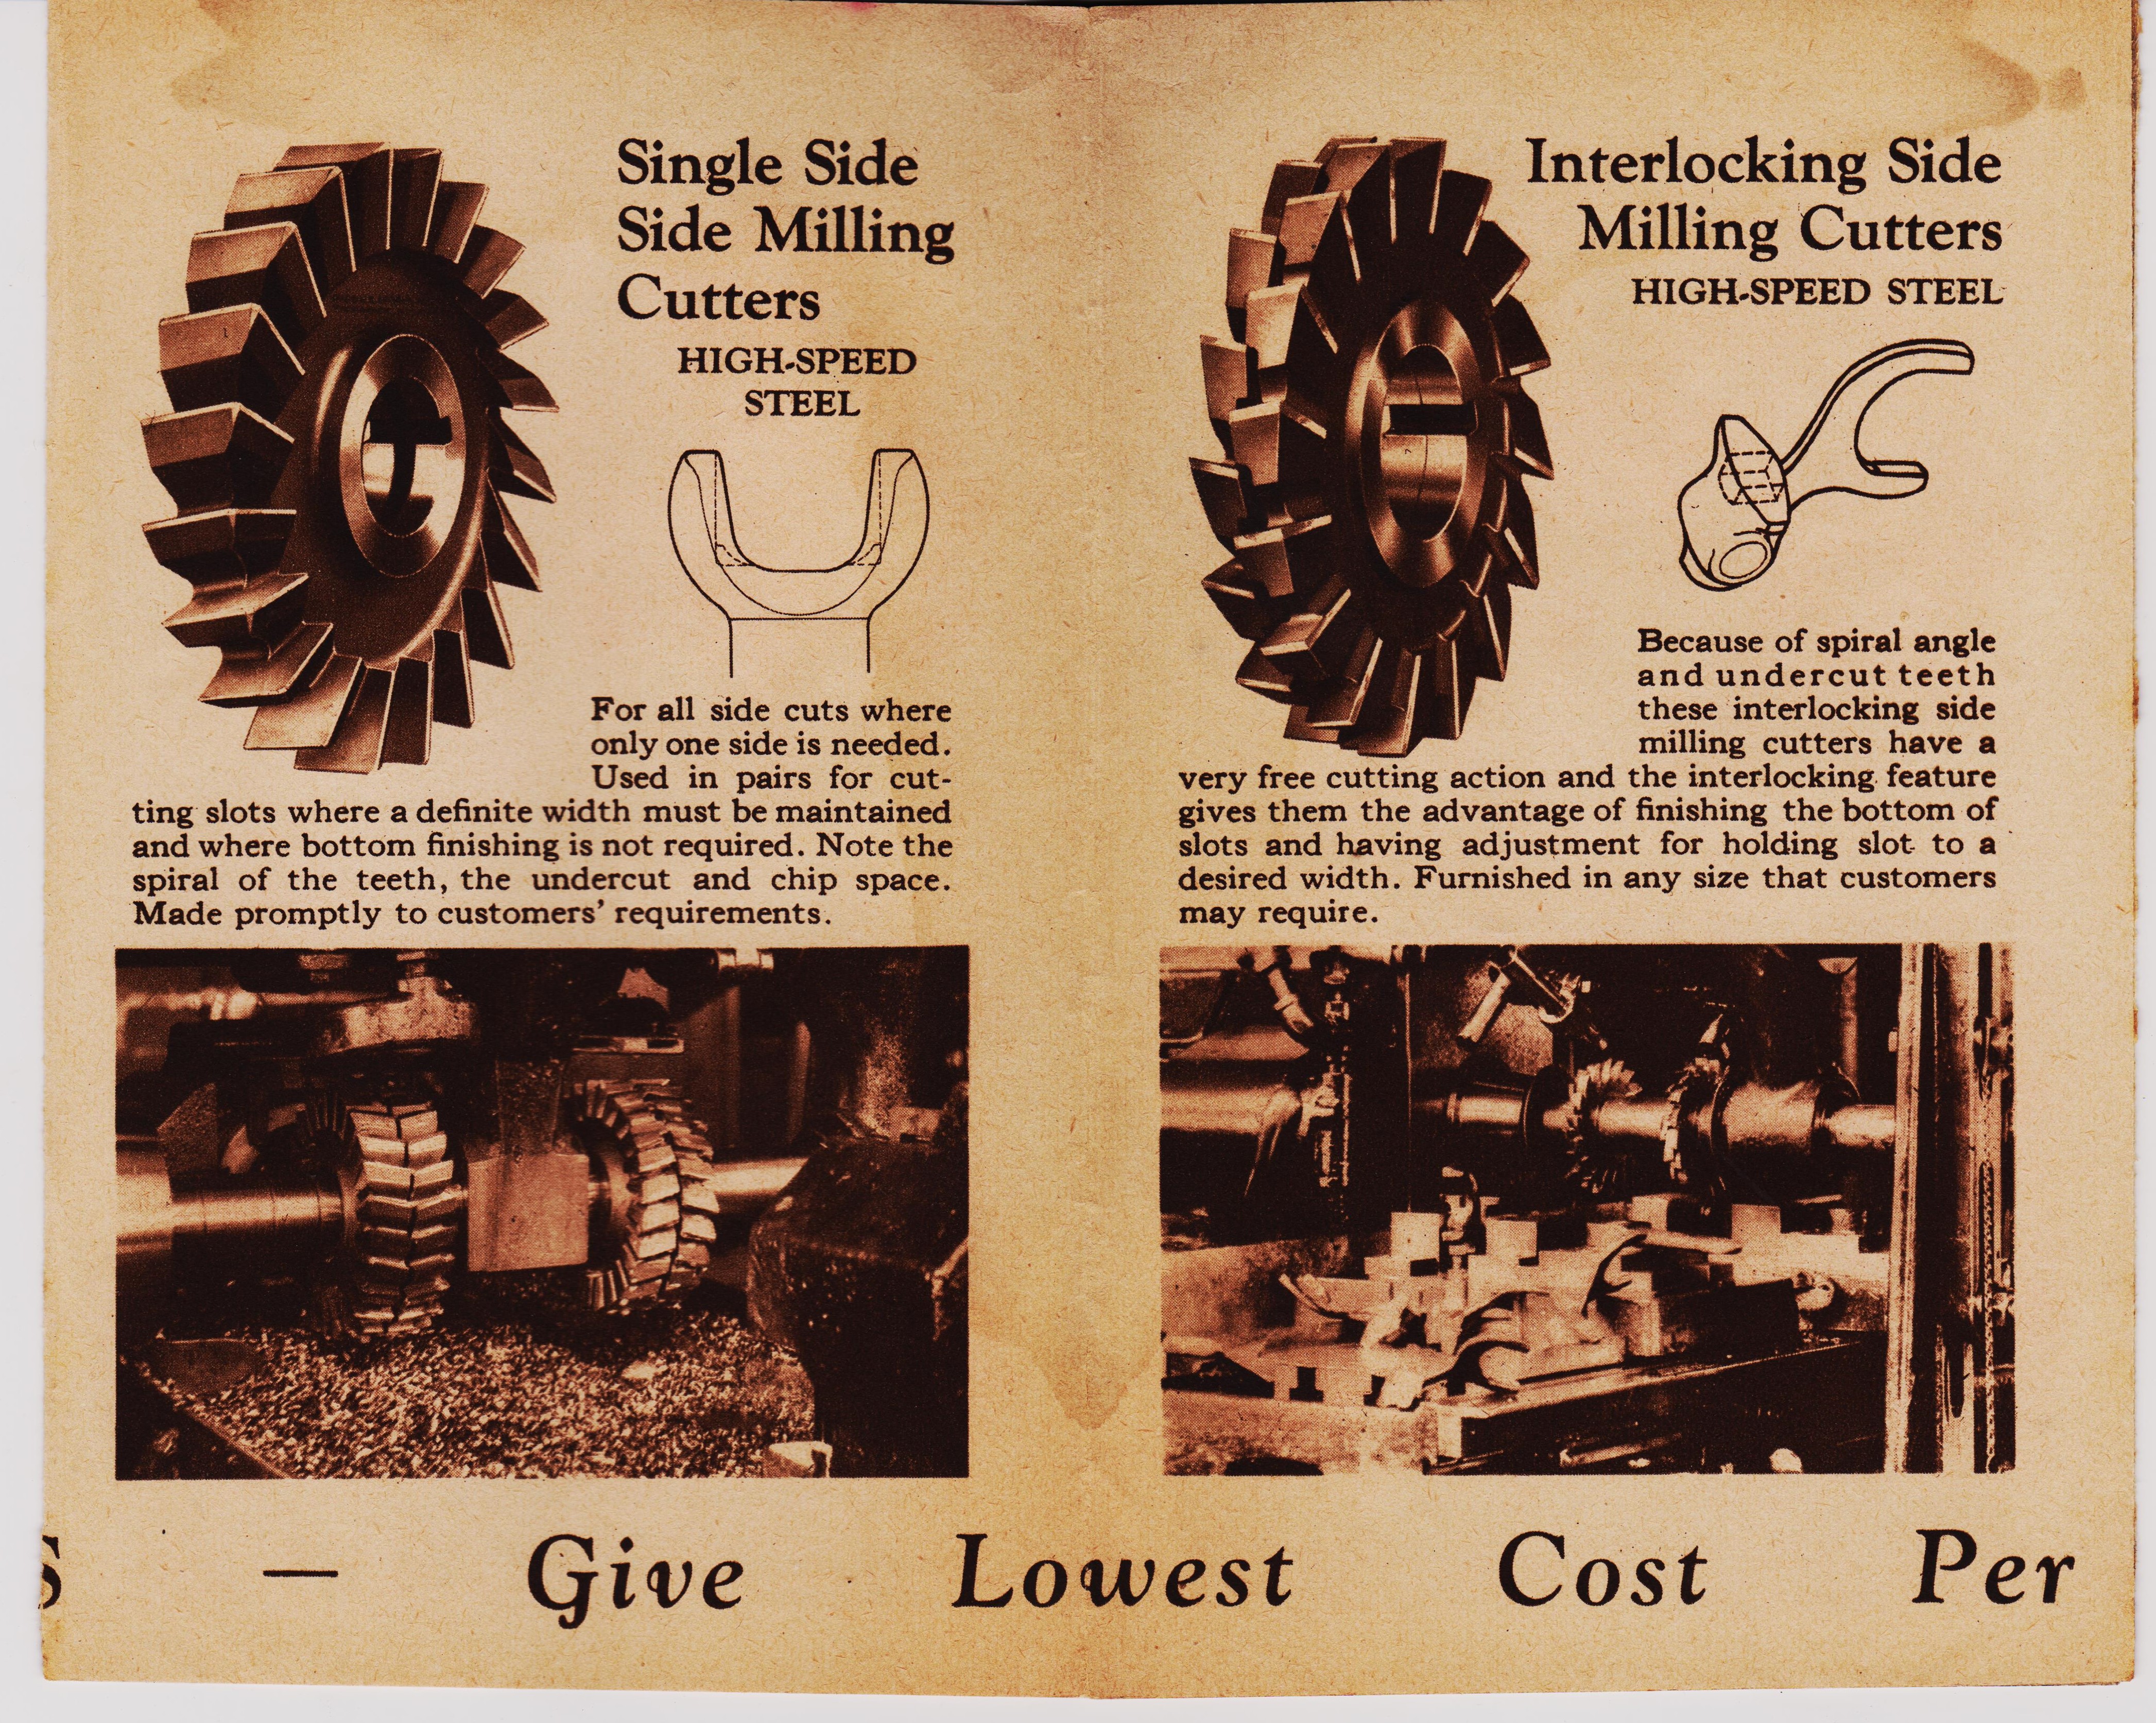 https://antiquemachinery.com/images-2020/Automatic-Gear-Cutting-Machines-Brown-and-Sharpe-Mfg-Co-1914-pg-20-Use-of-Depth-of-Gear-Tooth-Micrometer-Gaugeing--re-cutting-teeth.jpg